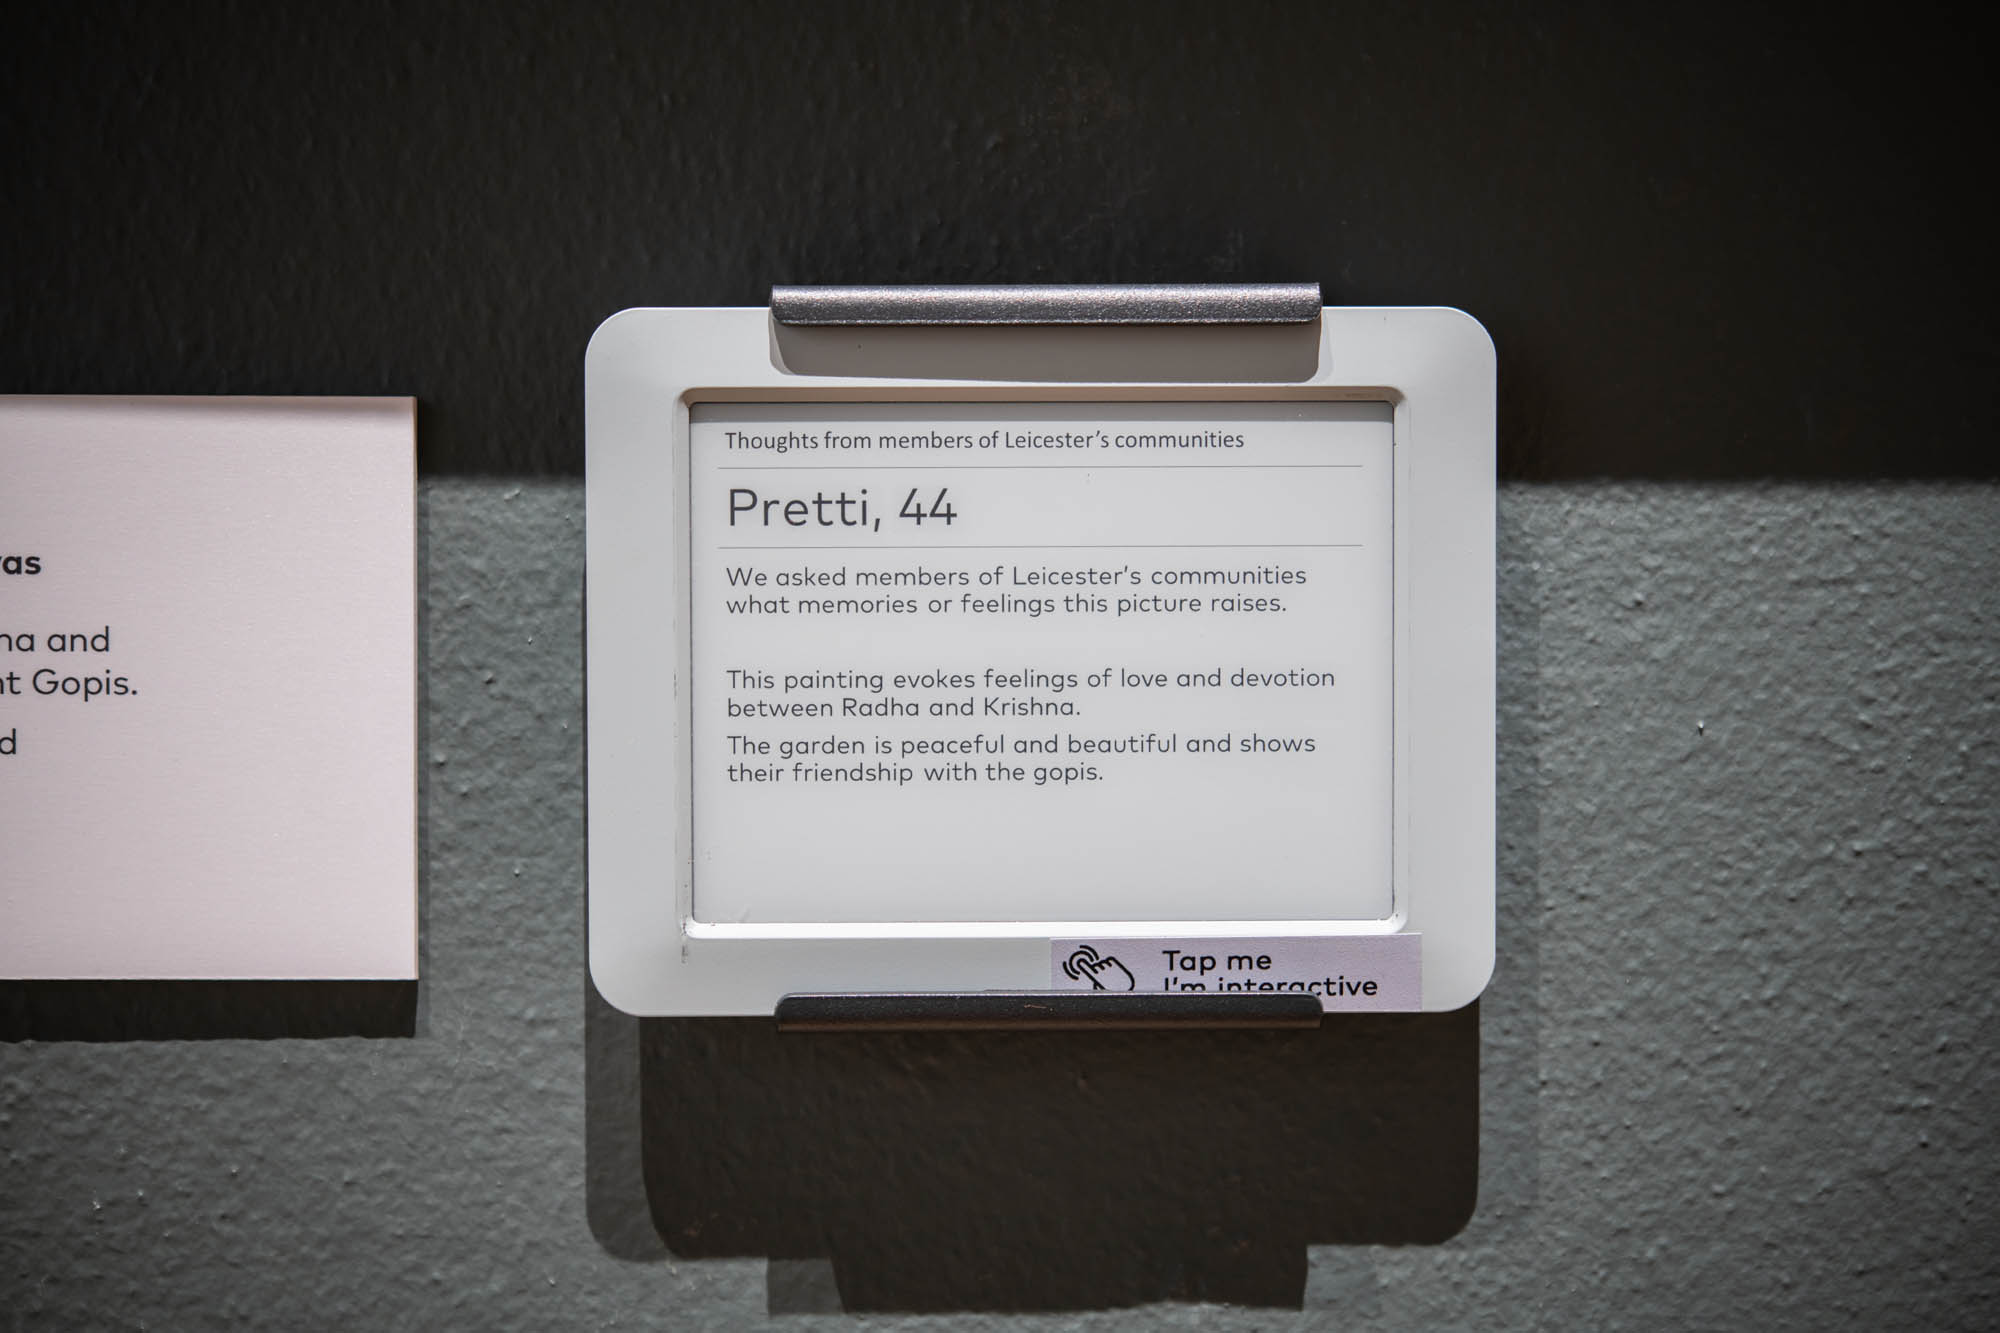 An example of a digital label in a recent exhibition.